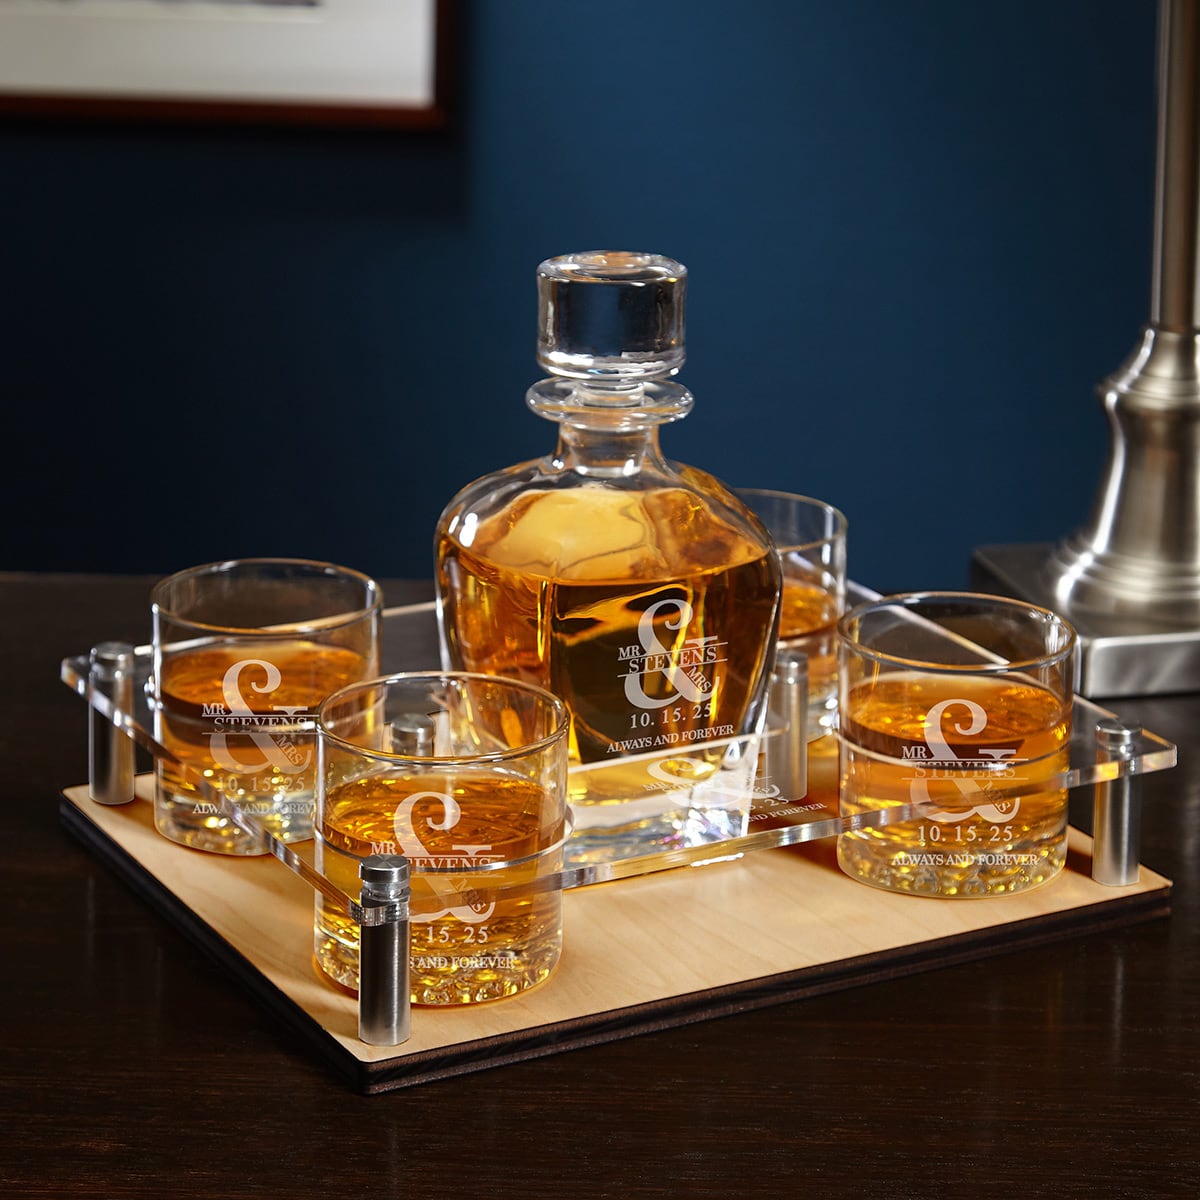 Wedding Gift Presentation Set with Whiskey Decanter & Glasses - 6pc Serving Tray & Display Set